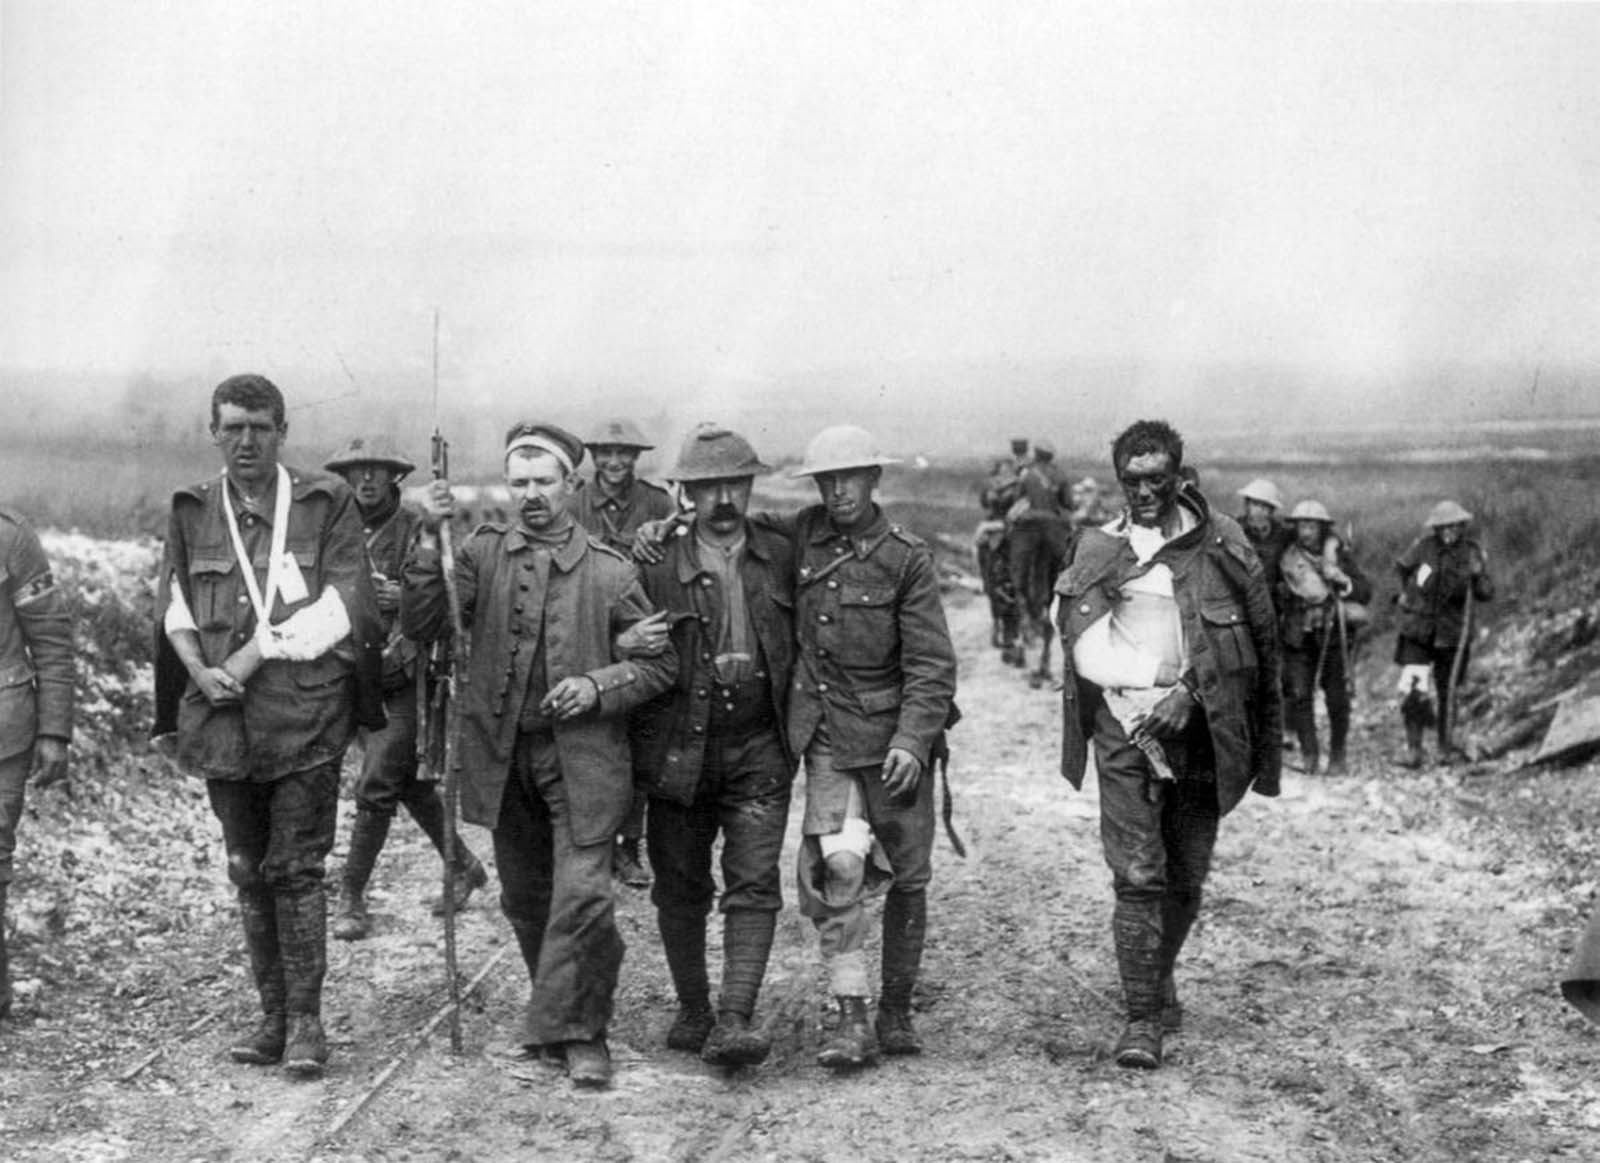 Wounded British soldiers return from the front lines.